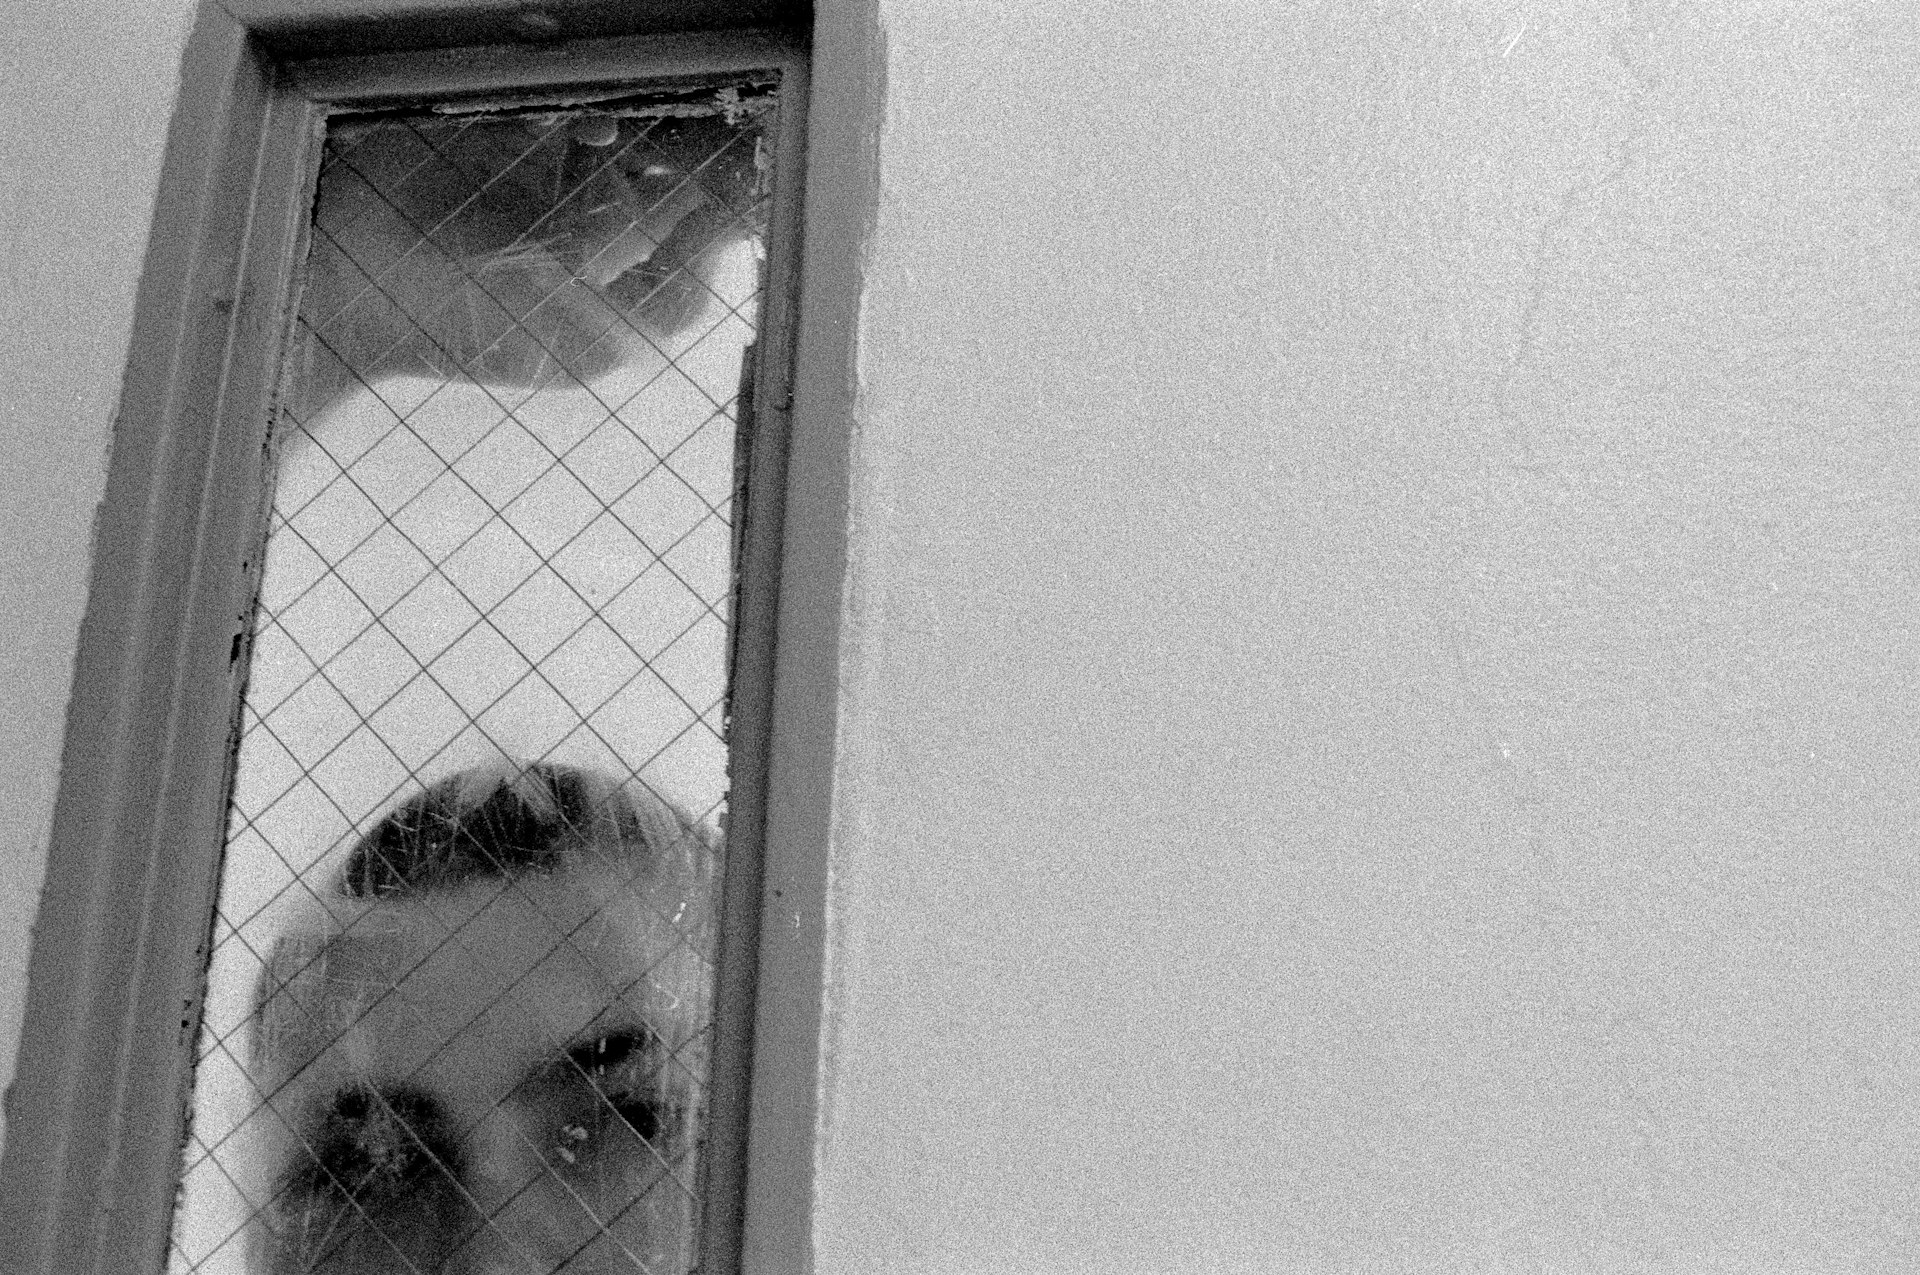 Fragile, intimate portraits of California’s imprisoned youth